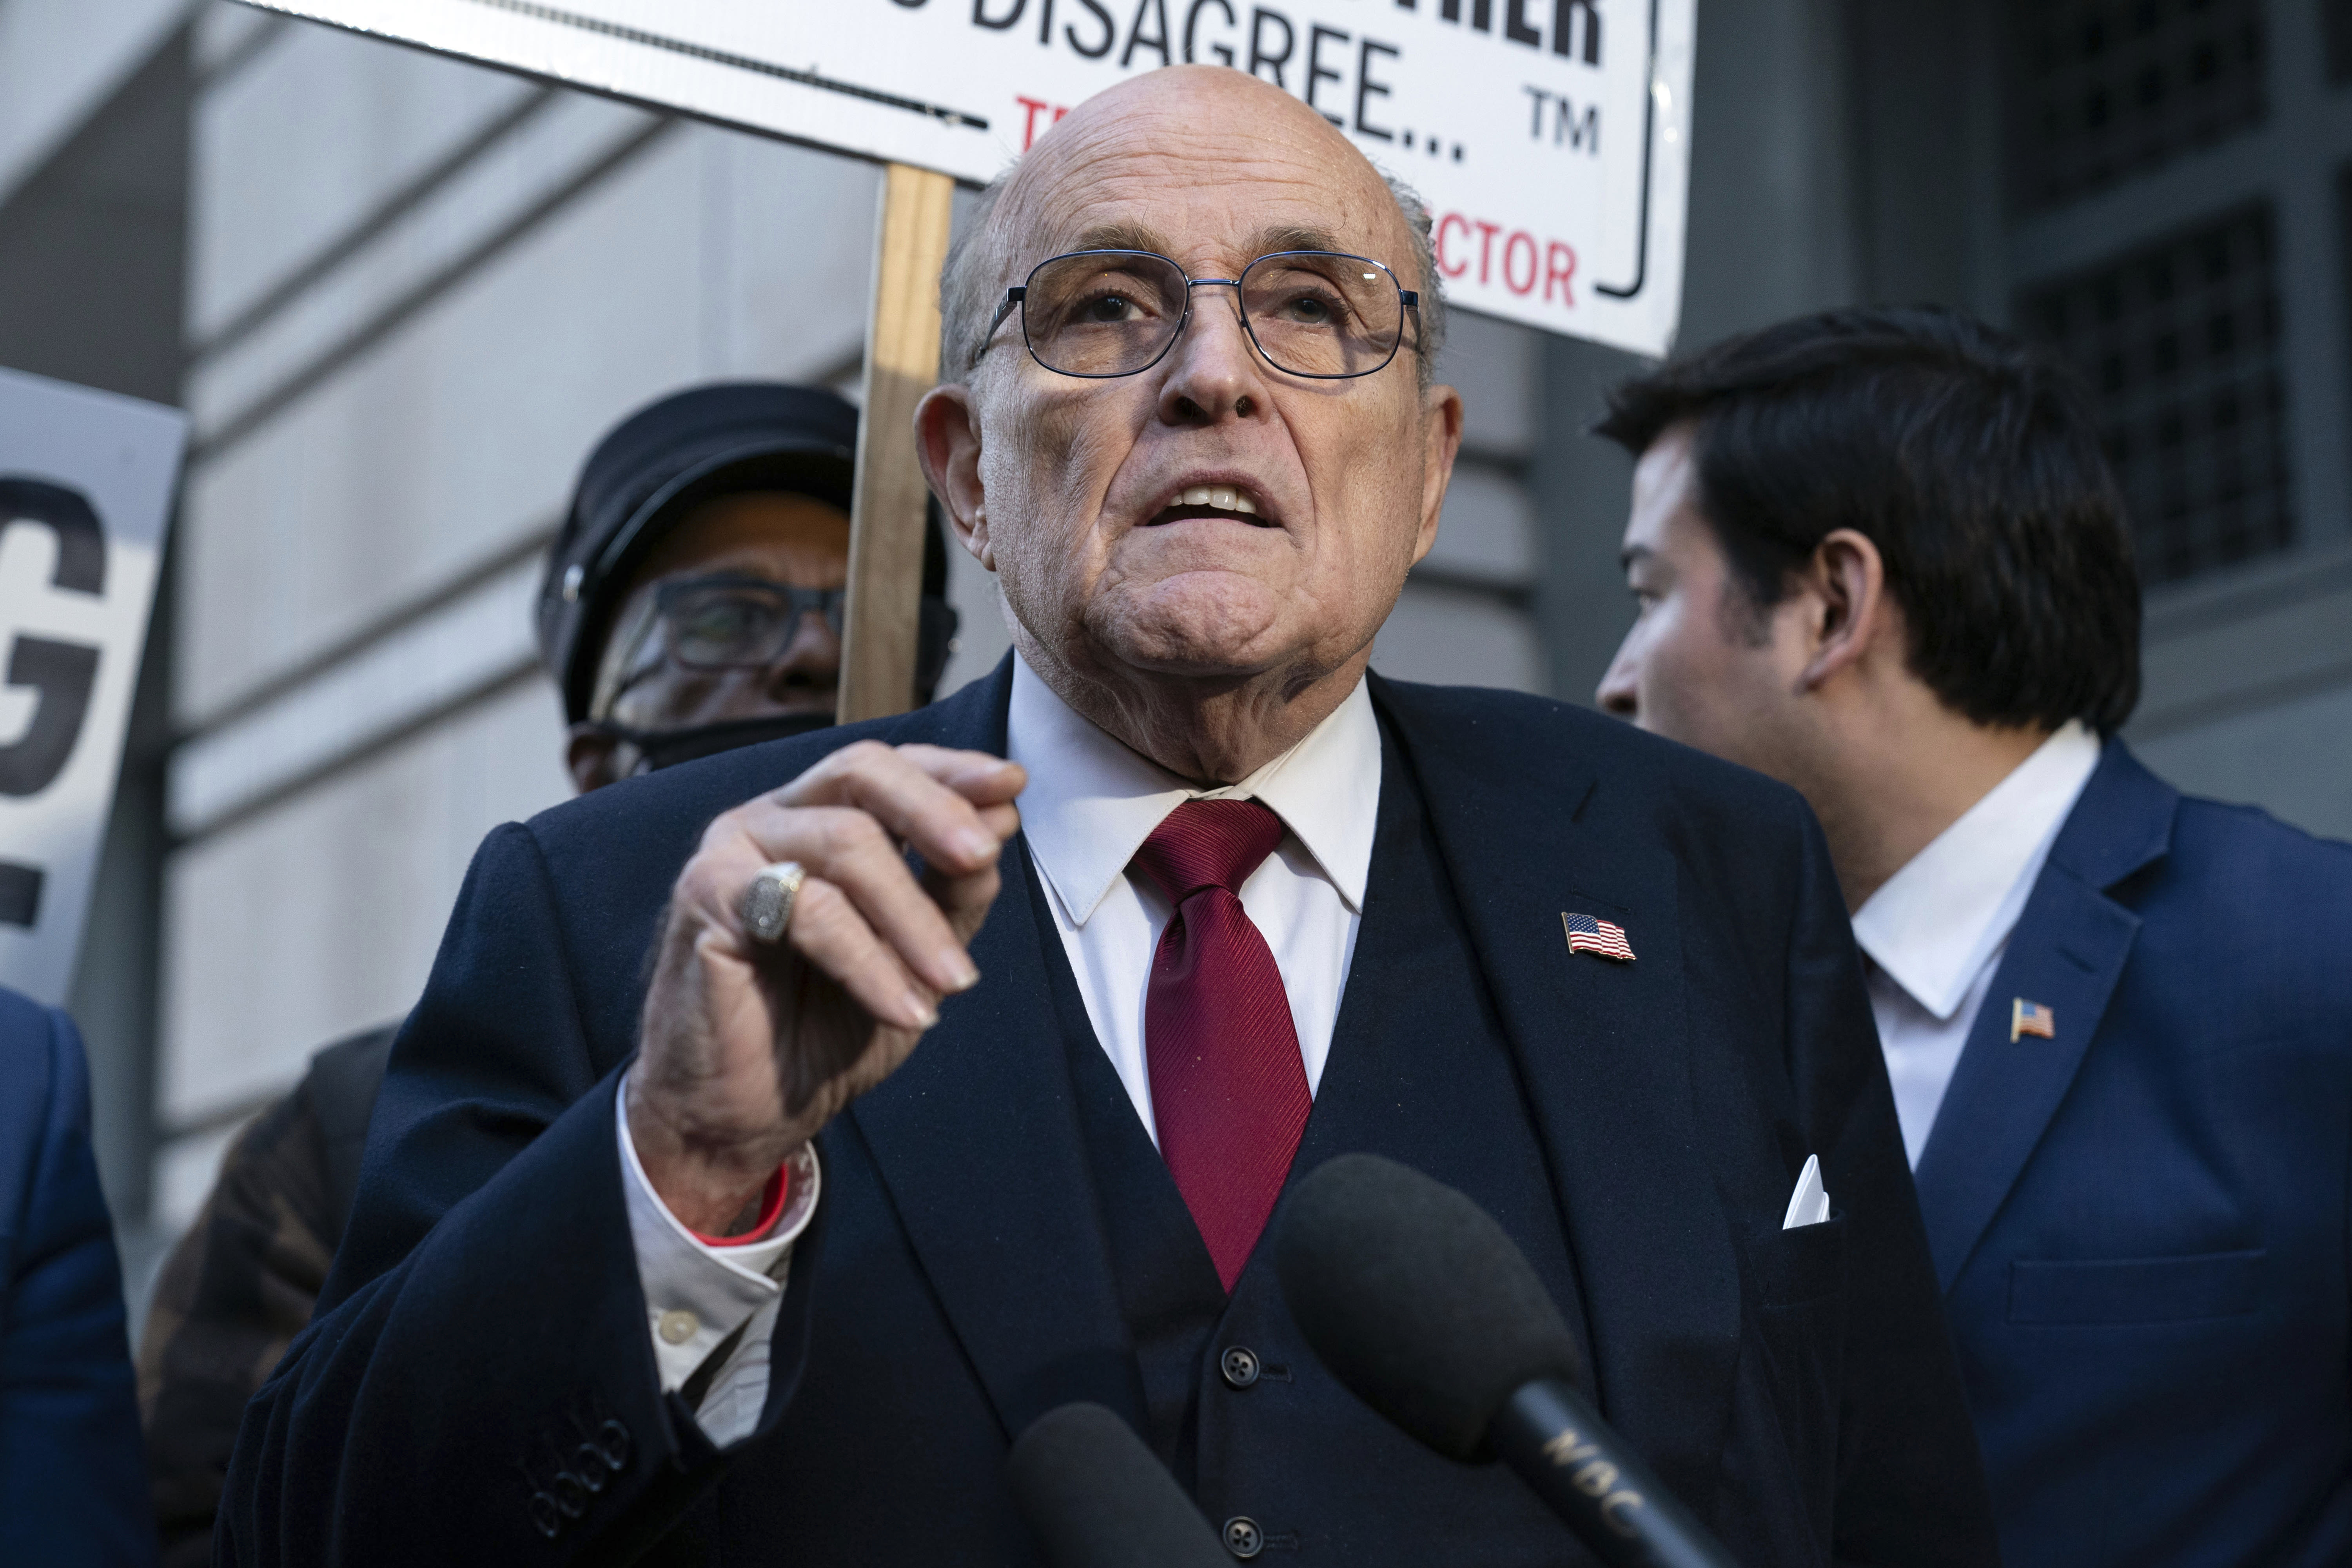 Giuliani bankruptcy judge rebuffs attempt to challenge $148 million judgment